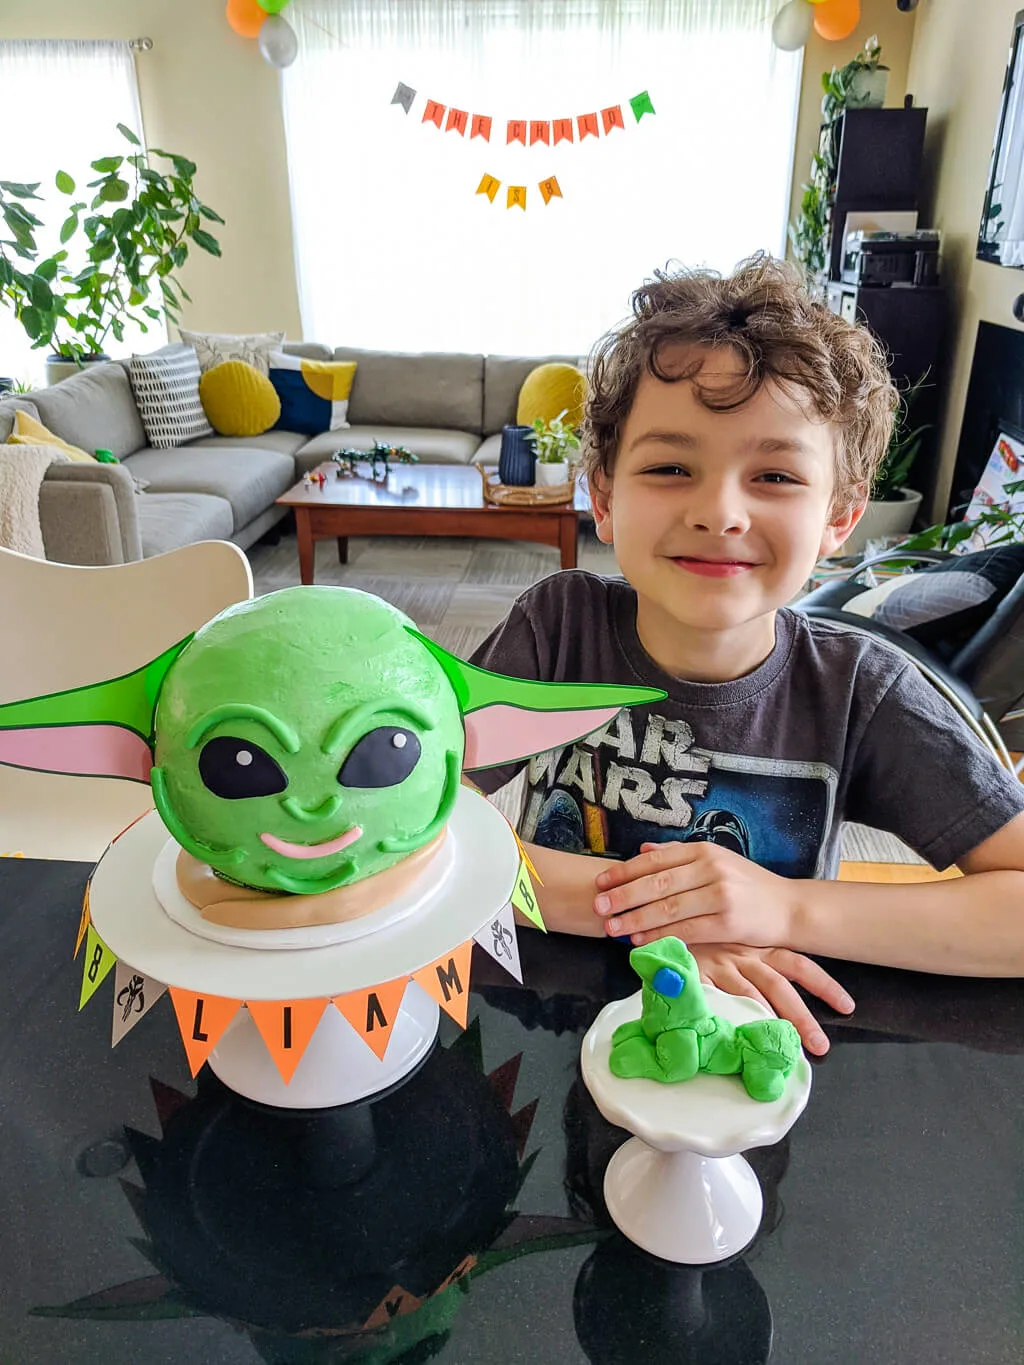 Liam with his Baby Yoda birthday cake. Copyright Merriment Design Co. Do not distribute without written permission.